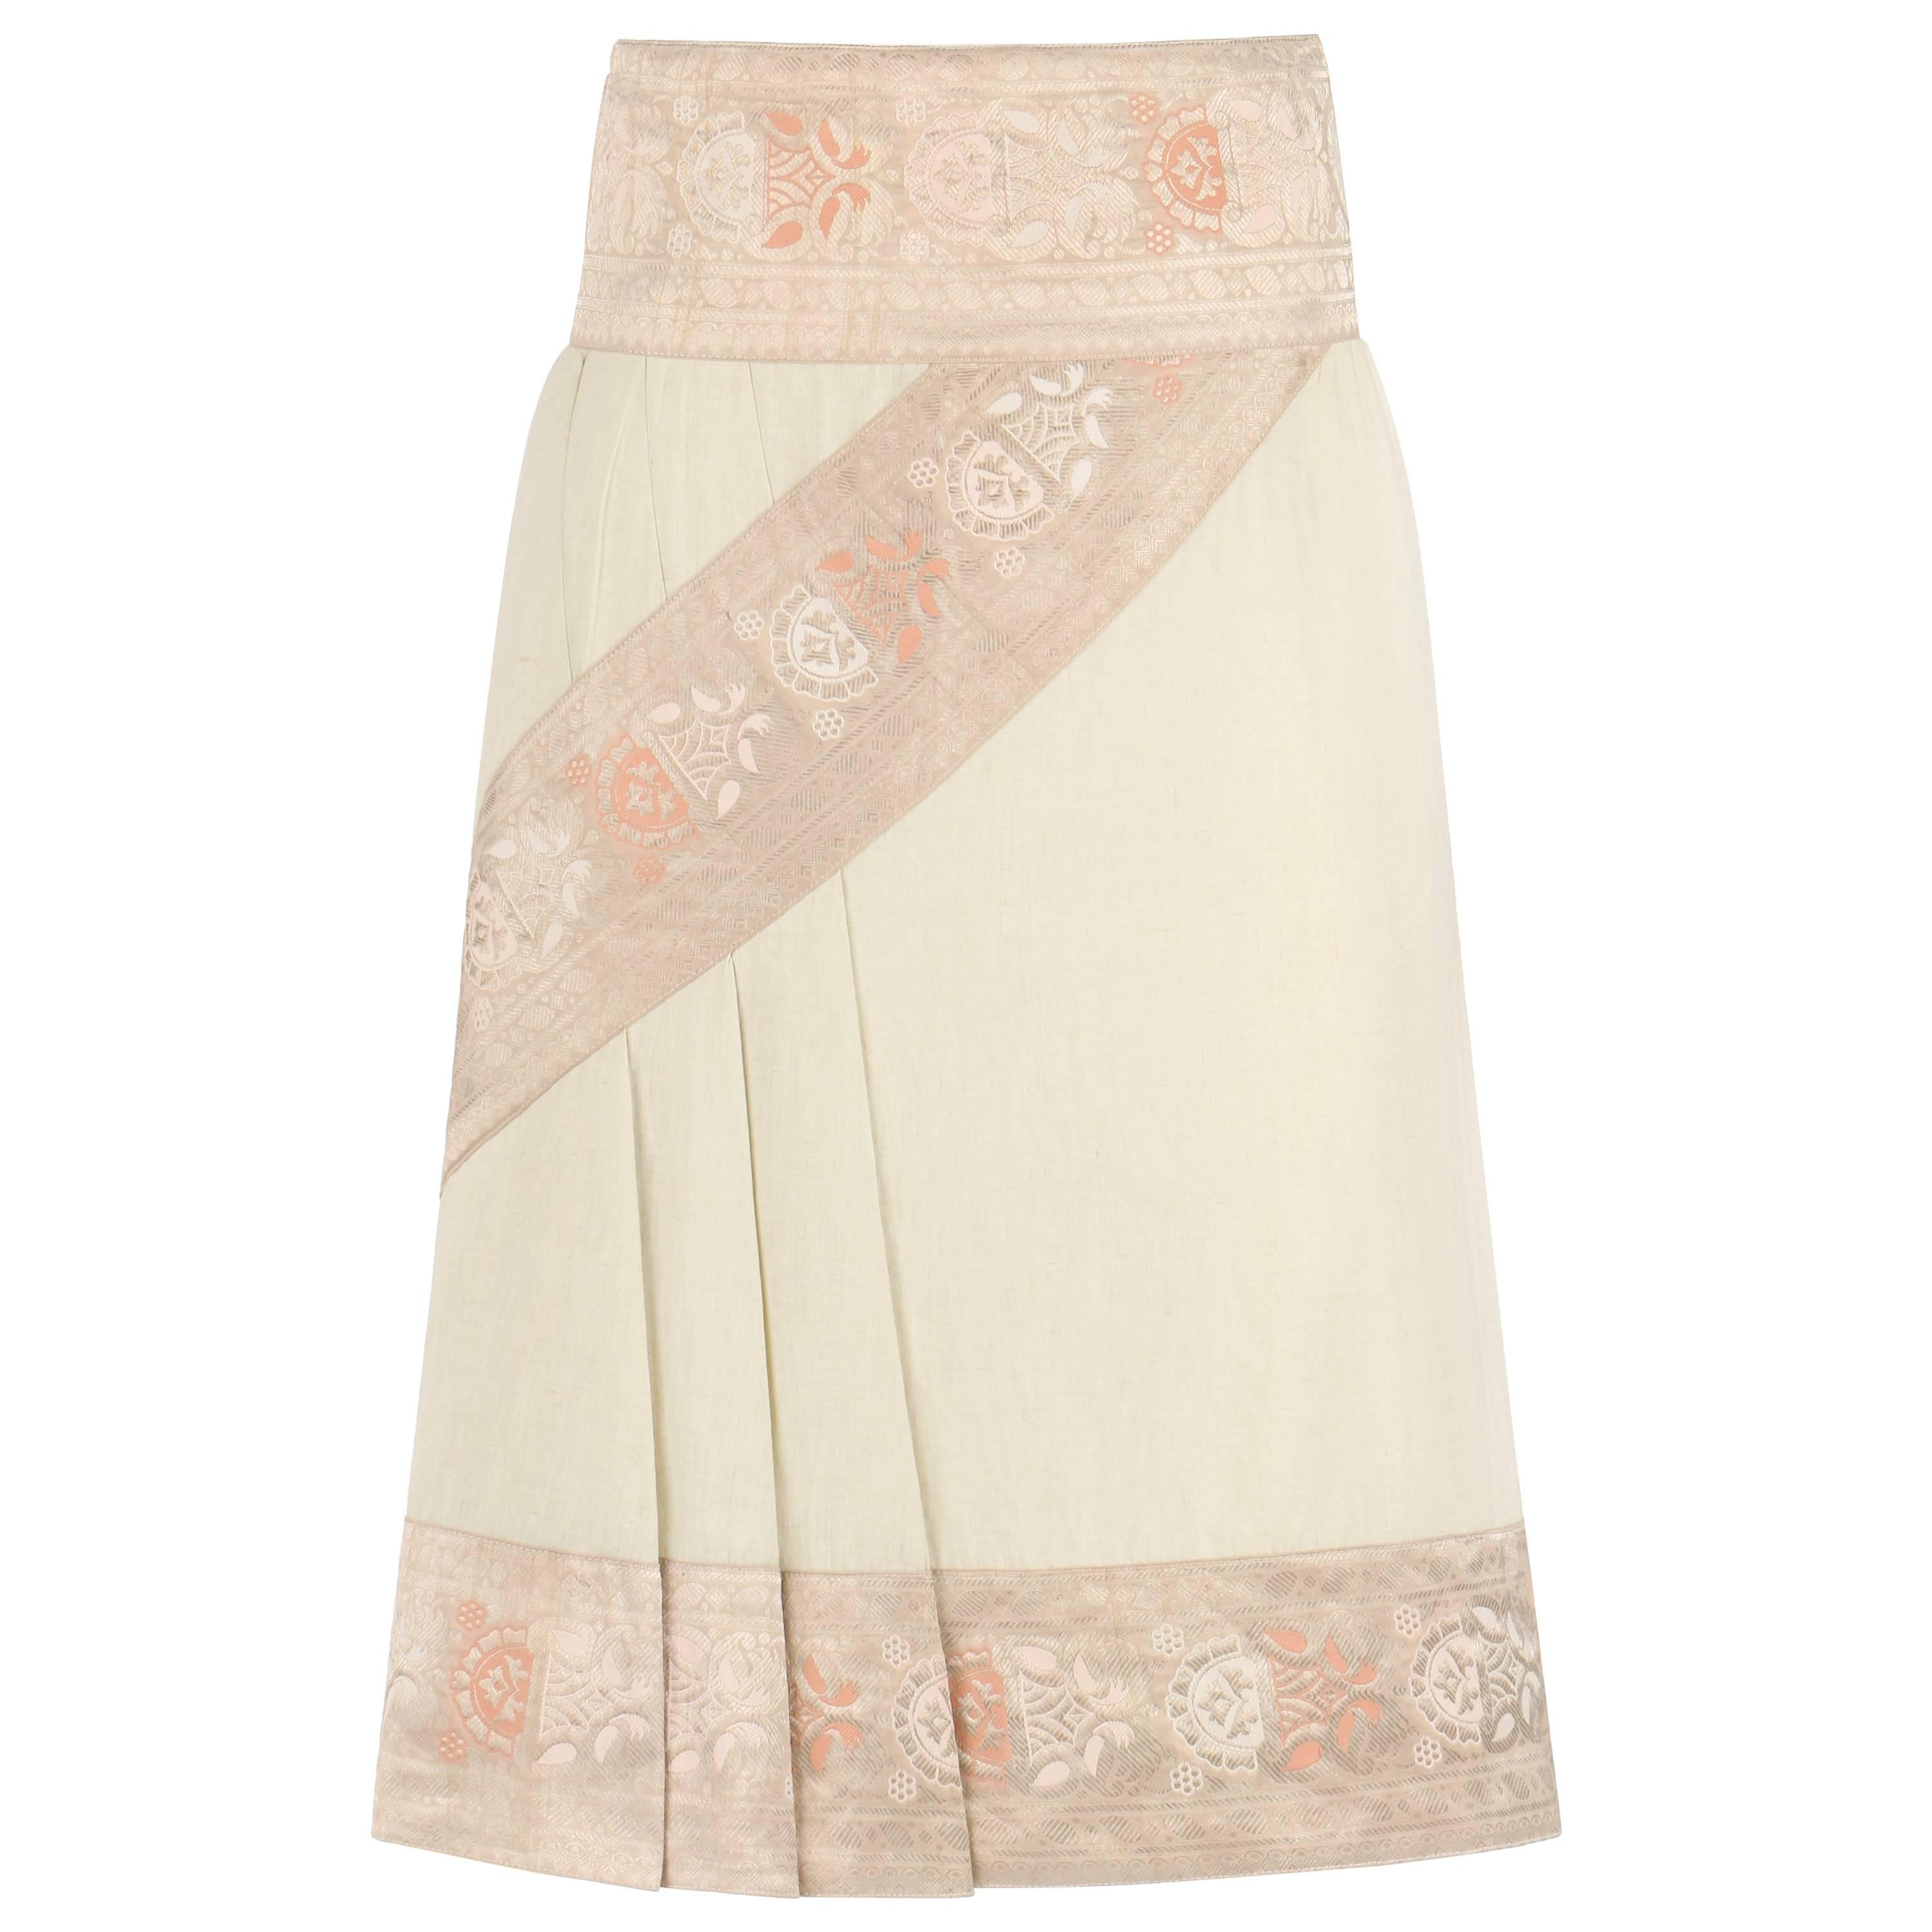 ALEXANDER McQUEEN S/S 2005 "It's Only A Game" Cream Cotton Brocade Detail Skirt For Sale